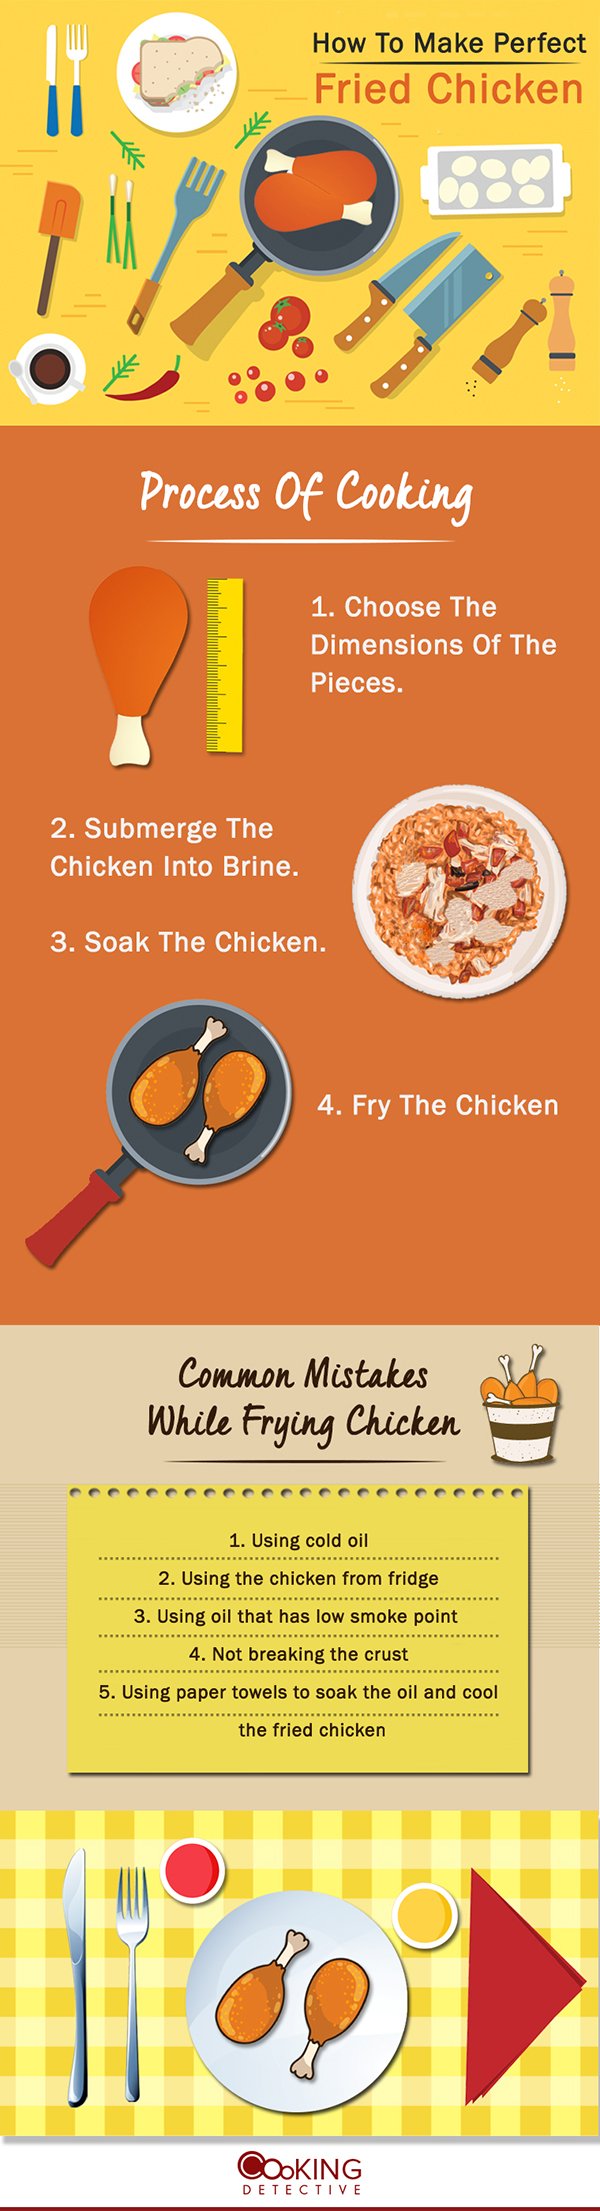 how-to-make-perfect-fried-chicken-600